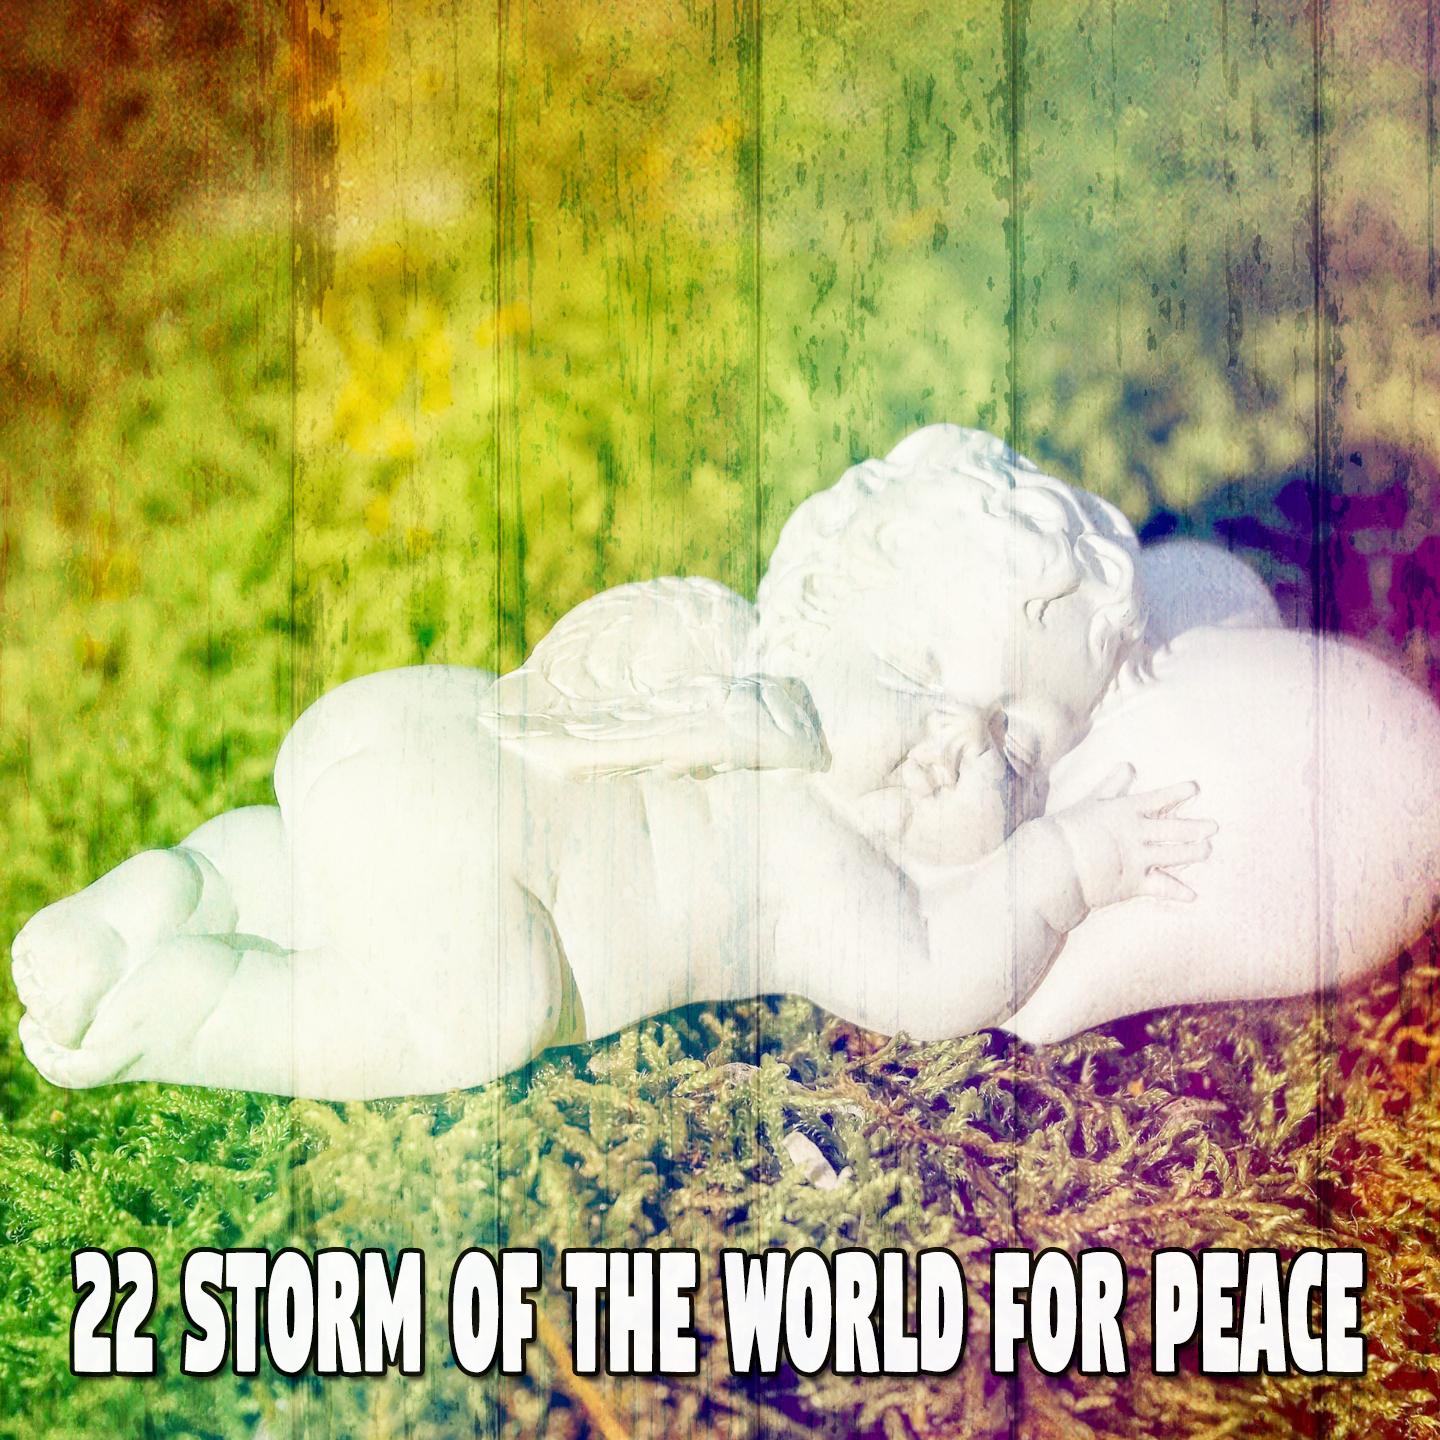 22 Storm of the World for Peace